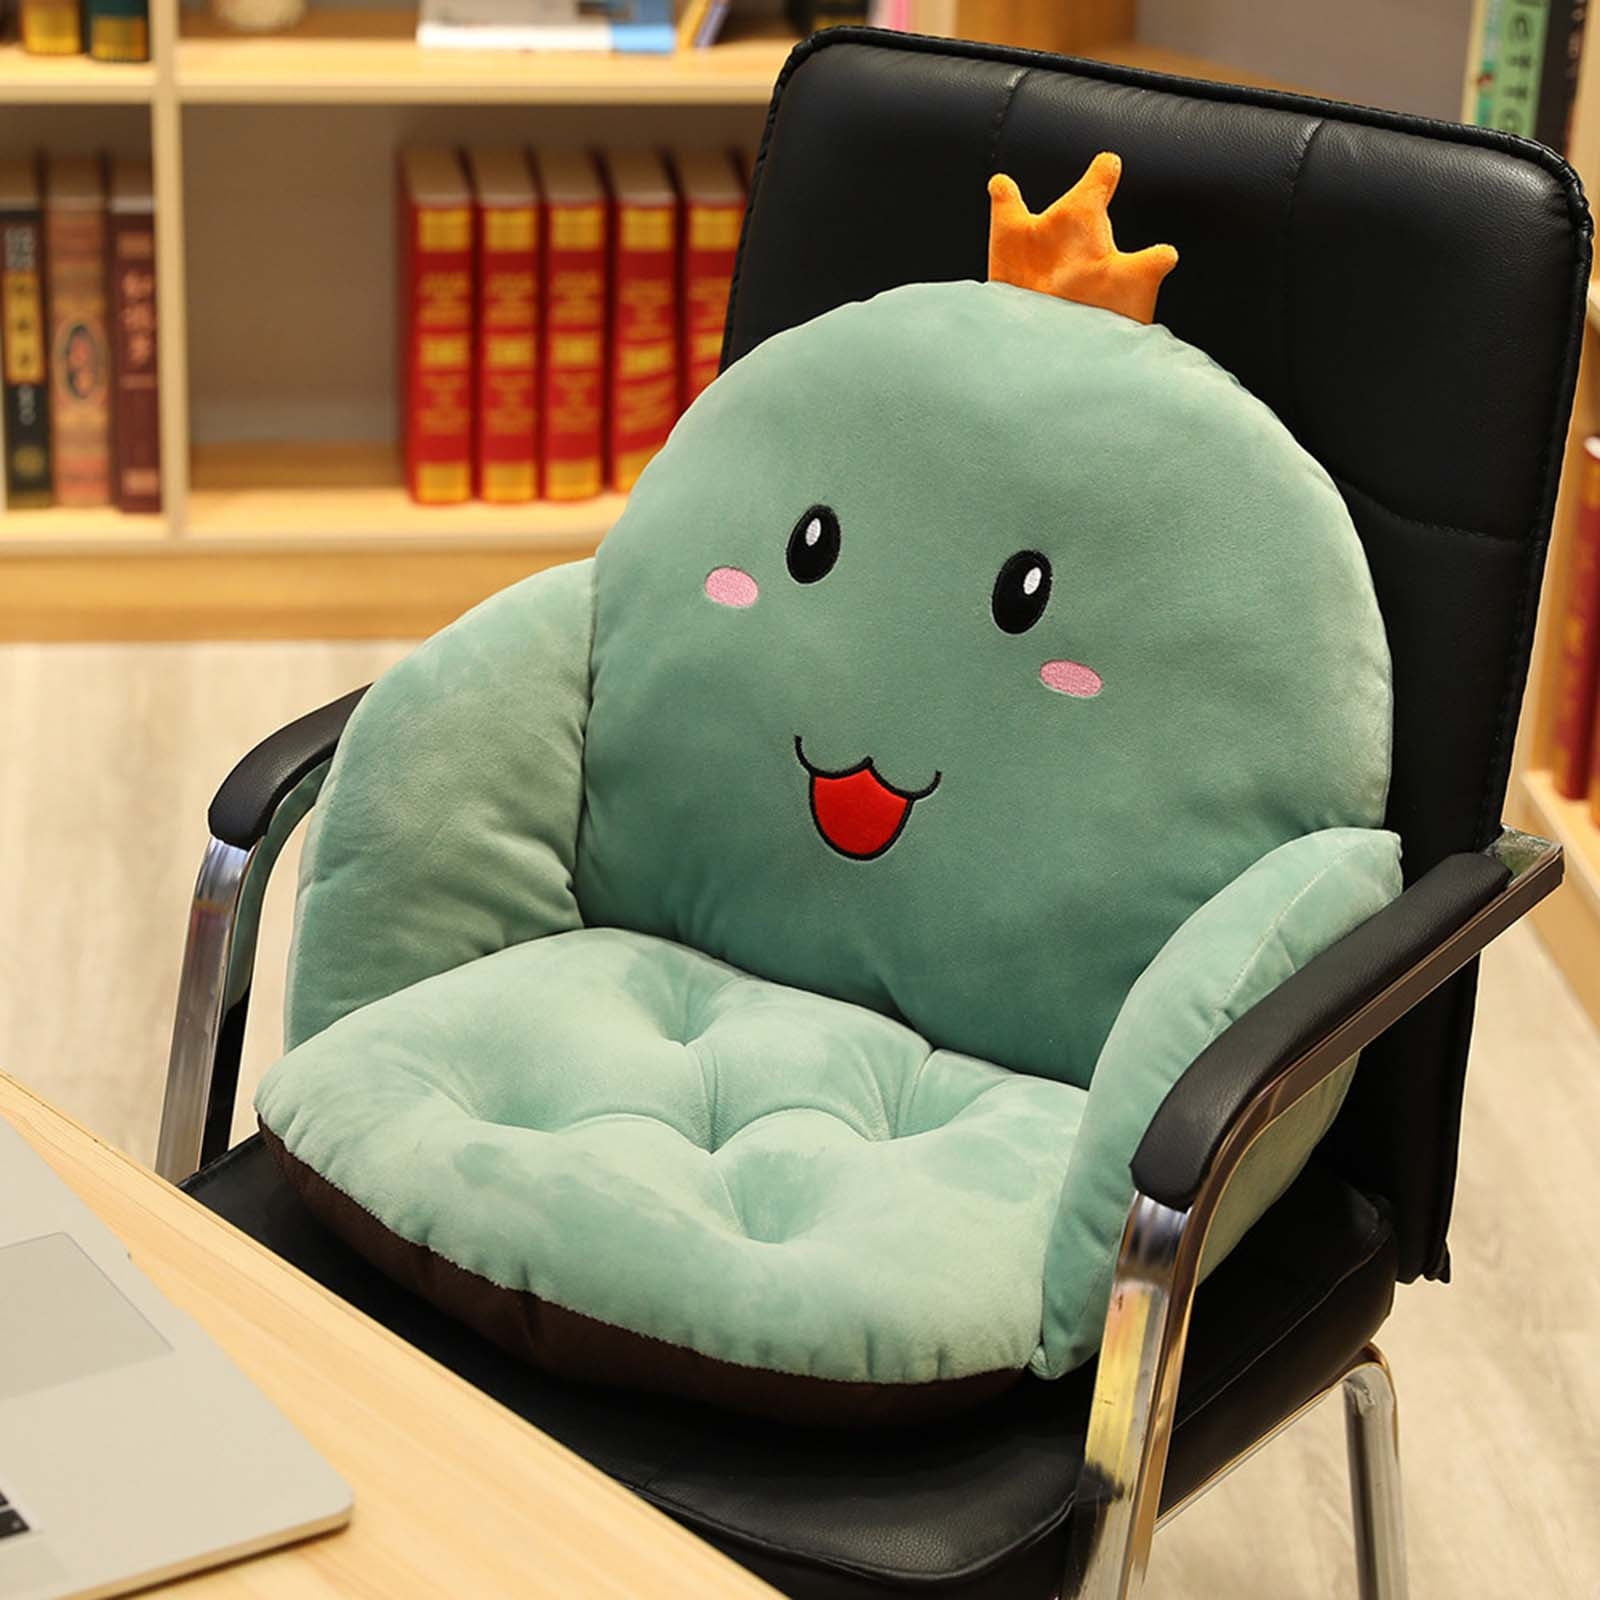 NUTEOR Chair Cushion Comfy Cute Seat Cushions, Kawaii Sofa Floor Pillow  Cute Plush Seat Pad for Gamer Chair, Cozy Pillows for Girl Office Worker  Gift